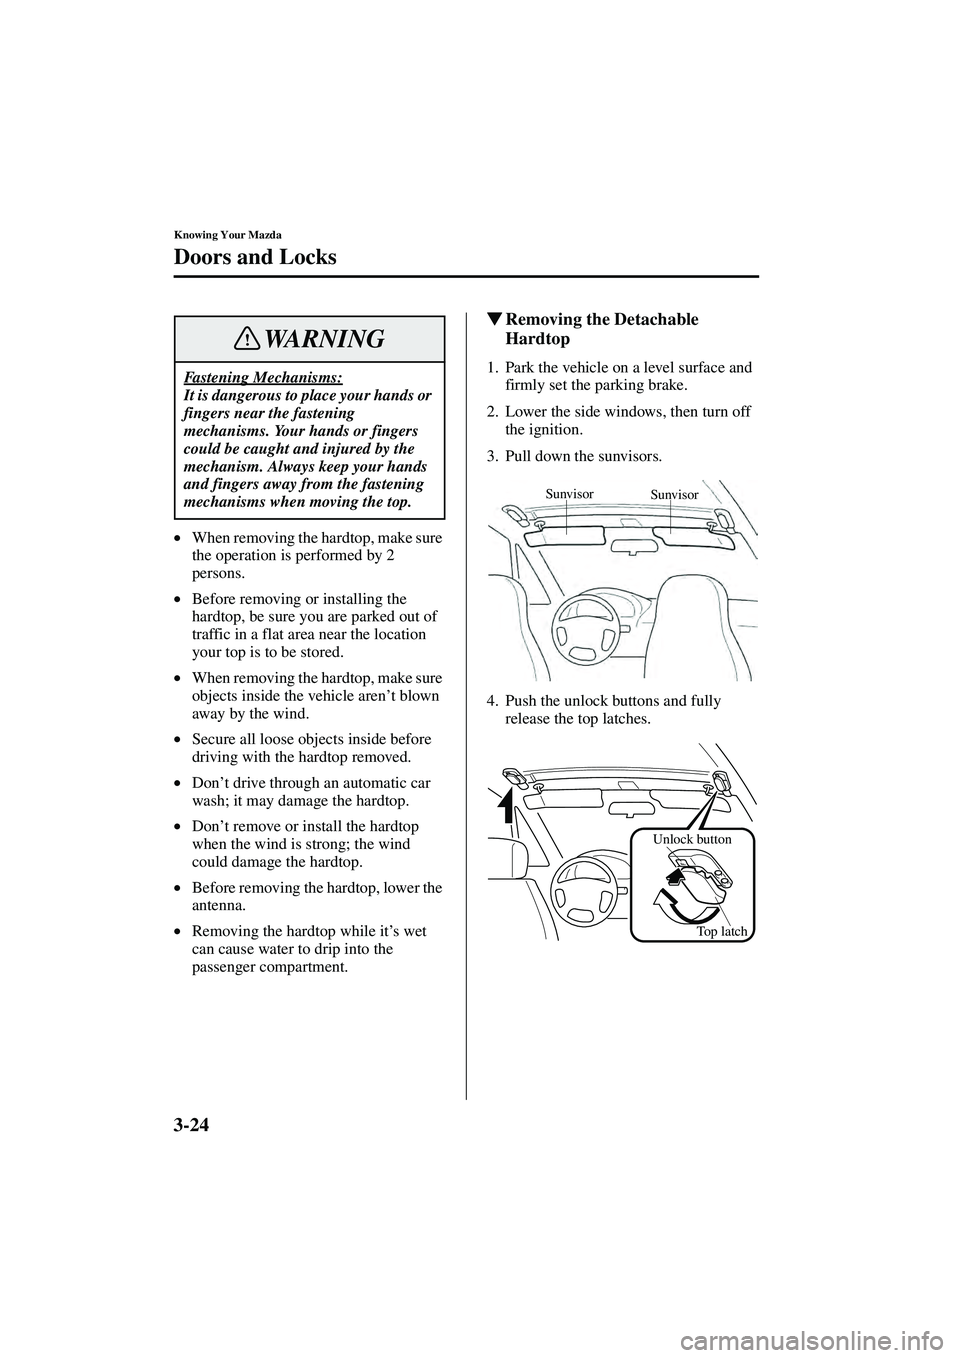 MAZDA MODEL MX-5 MIATA 2004  Owners Manual 3-24
Knowing Your Mazda
Doors and Locks
Form No. 8S15-EA-03G
•When removing the hardtop, make sure 
the operation is performed by 2 
persons.
• Before removing or installing the 
hardtop, be sure 